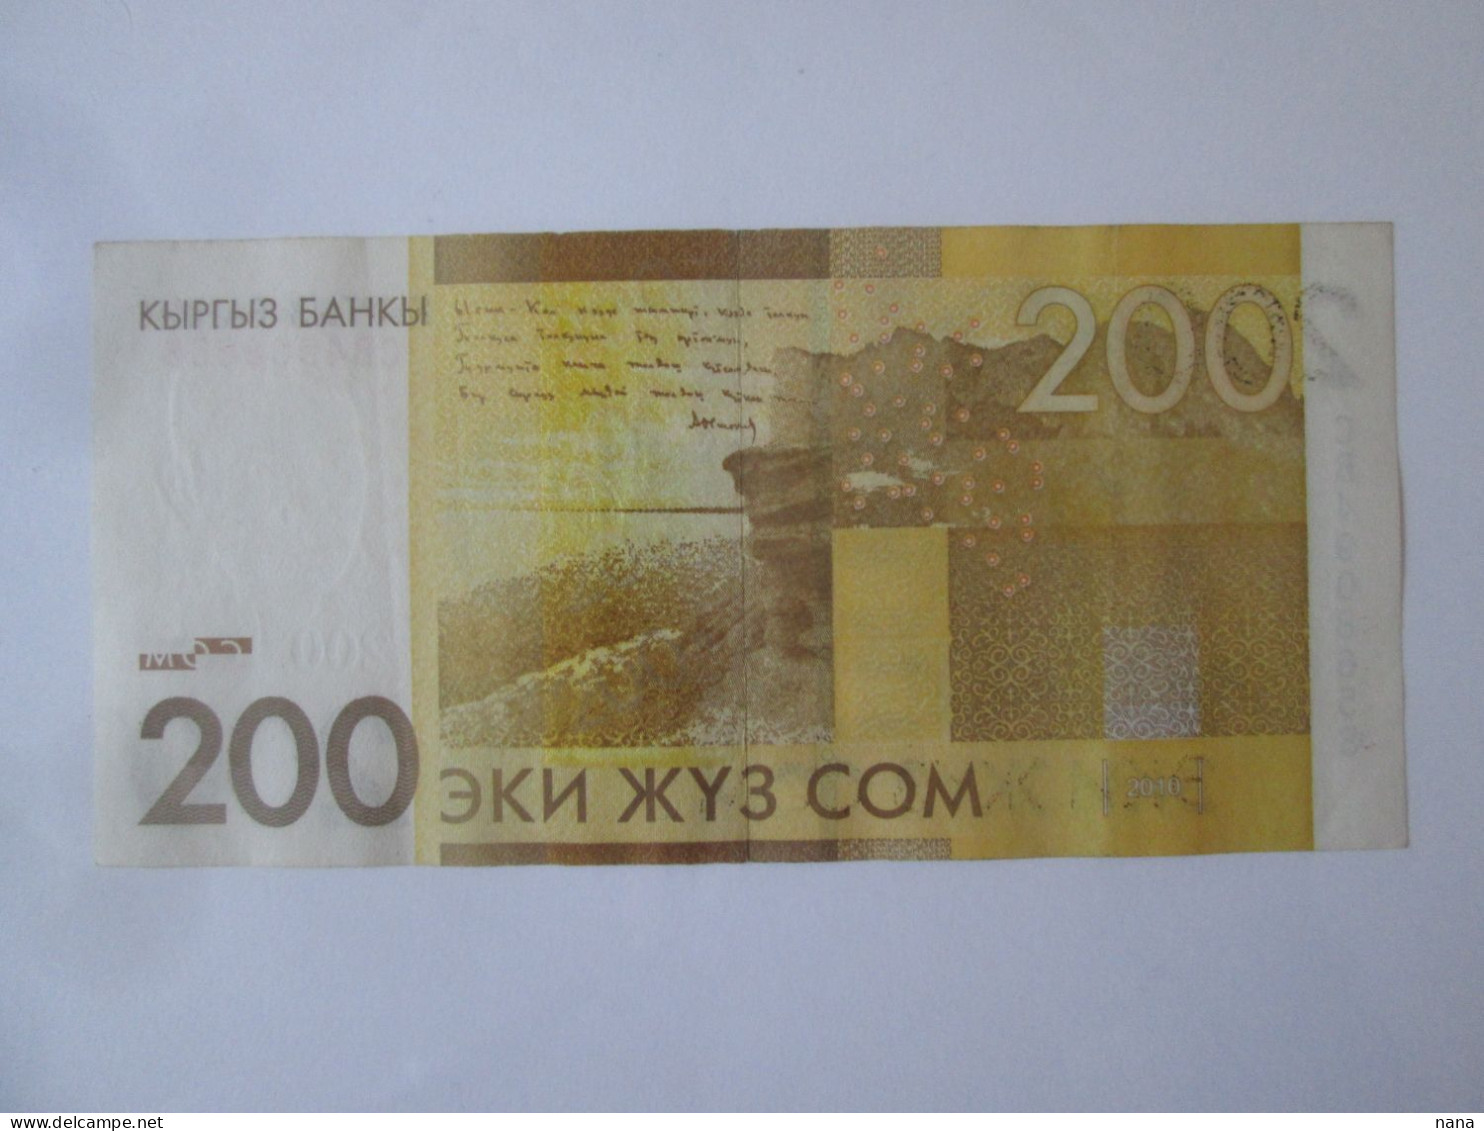 Kyrgyzstan 200 Som 2010 Banknote,see Pictures - Kyrgyzstan